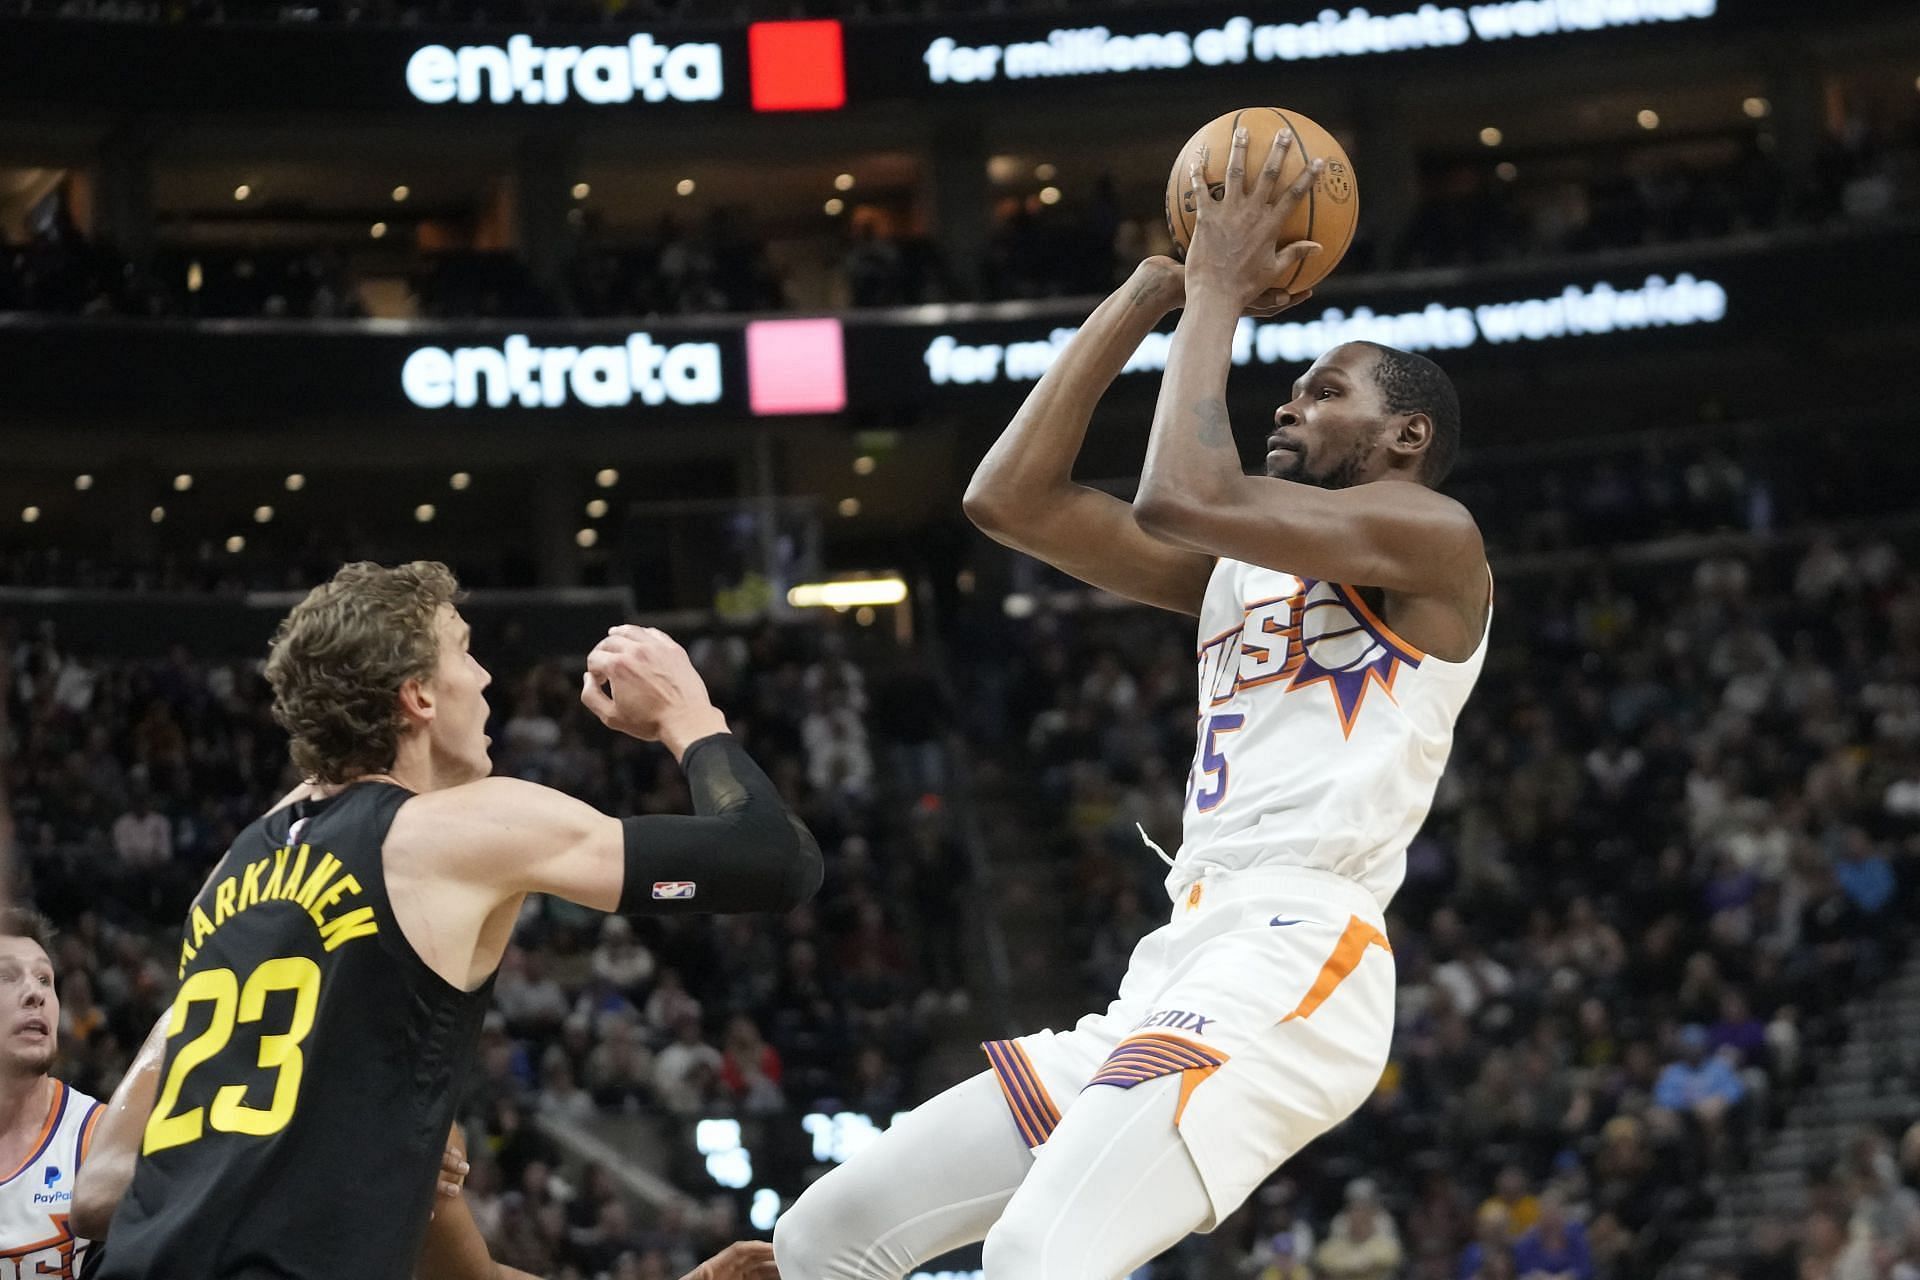 Kevin Durant going for a shot against Lauri Markkanen of the Utah Jazz.